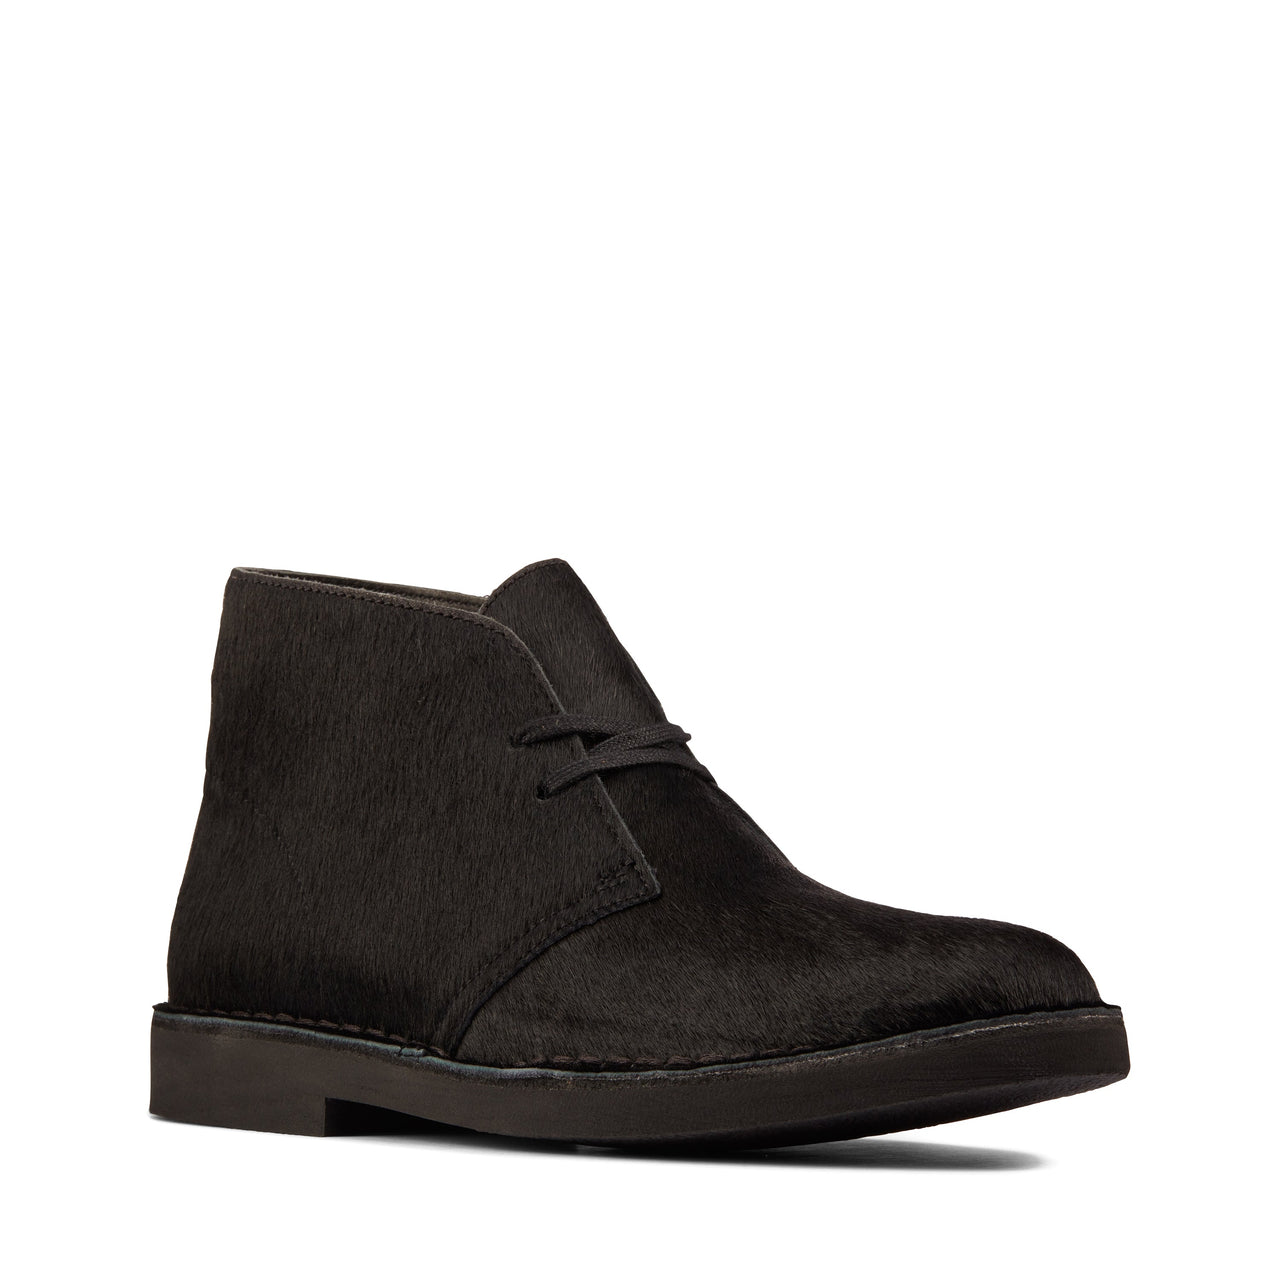 Stylish and comfortable Clarks Womens Desert Boot 2 in Black color for everyday wear